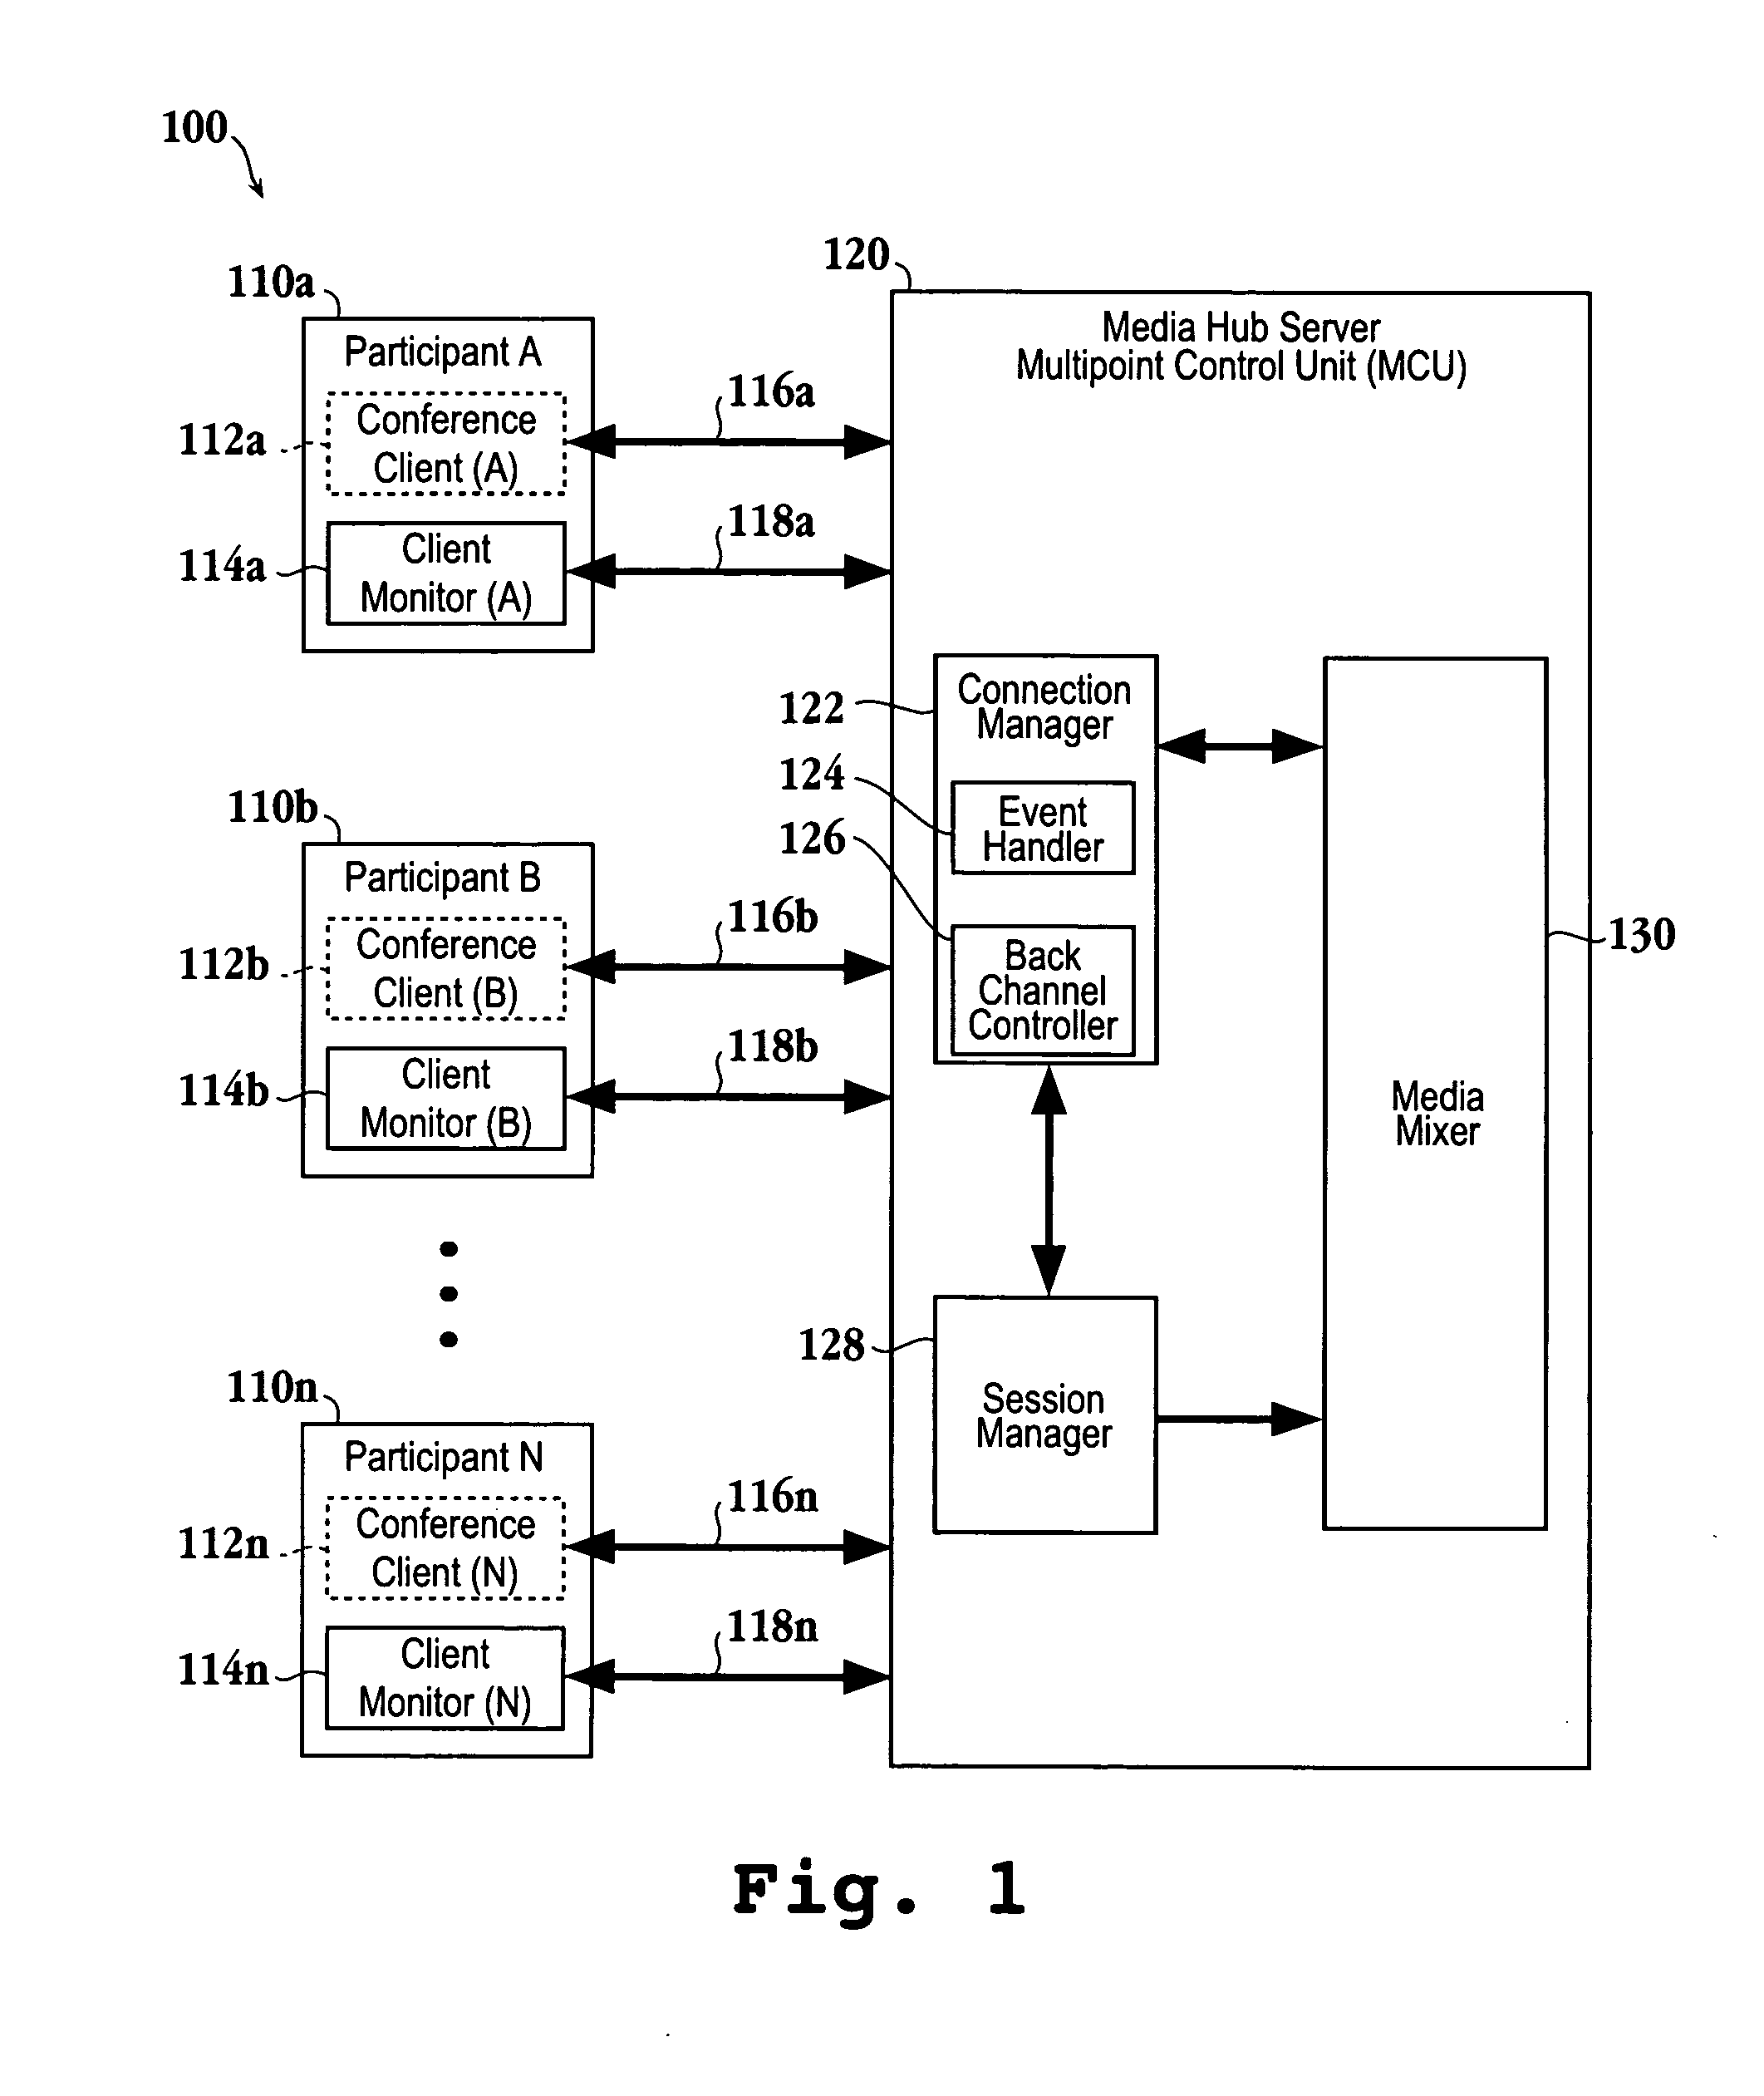 Local video loopback method for a multi-participant conference system using a back-channel video interface